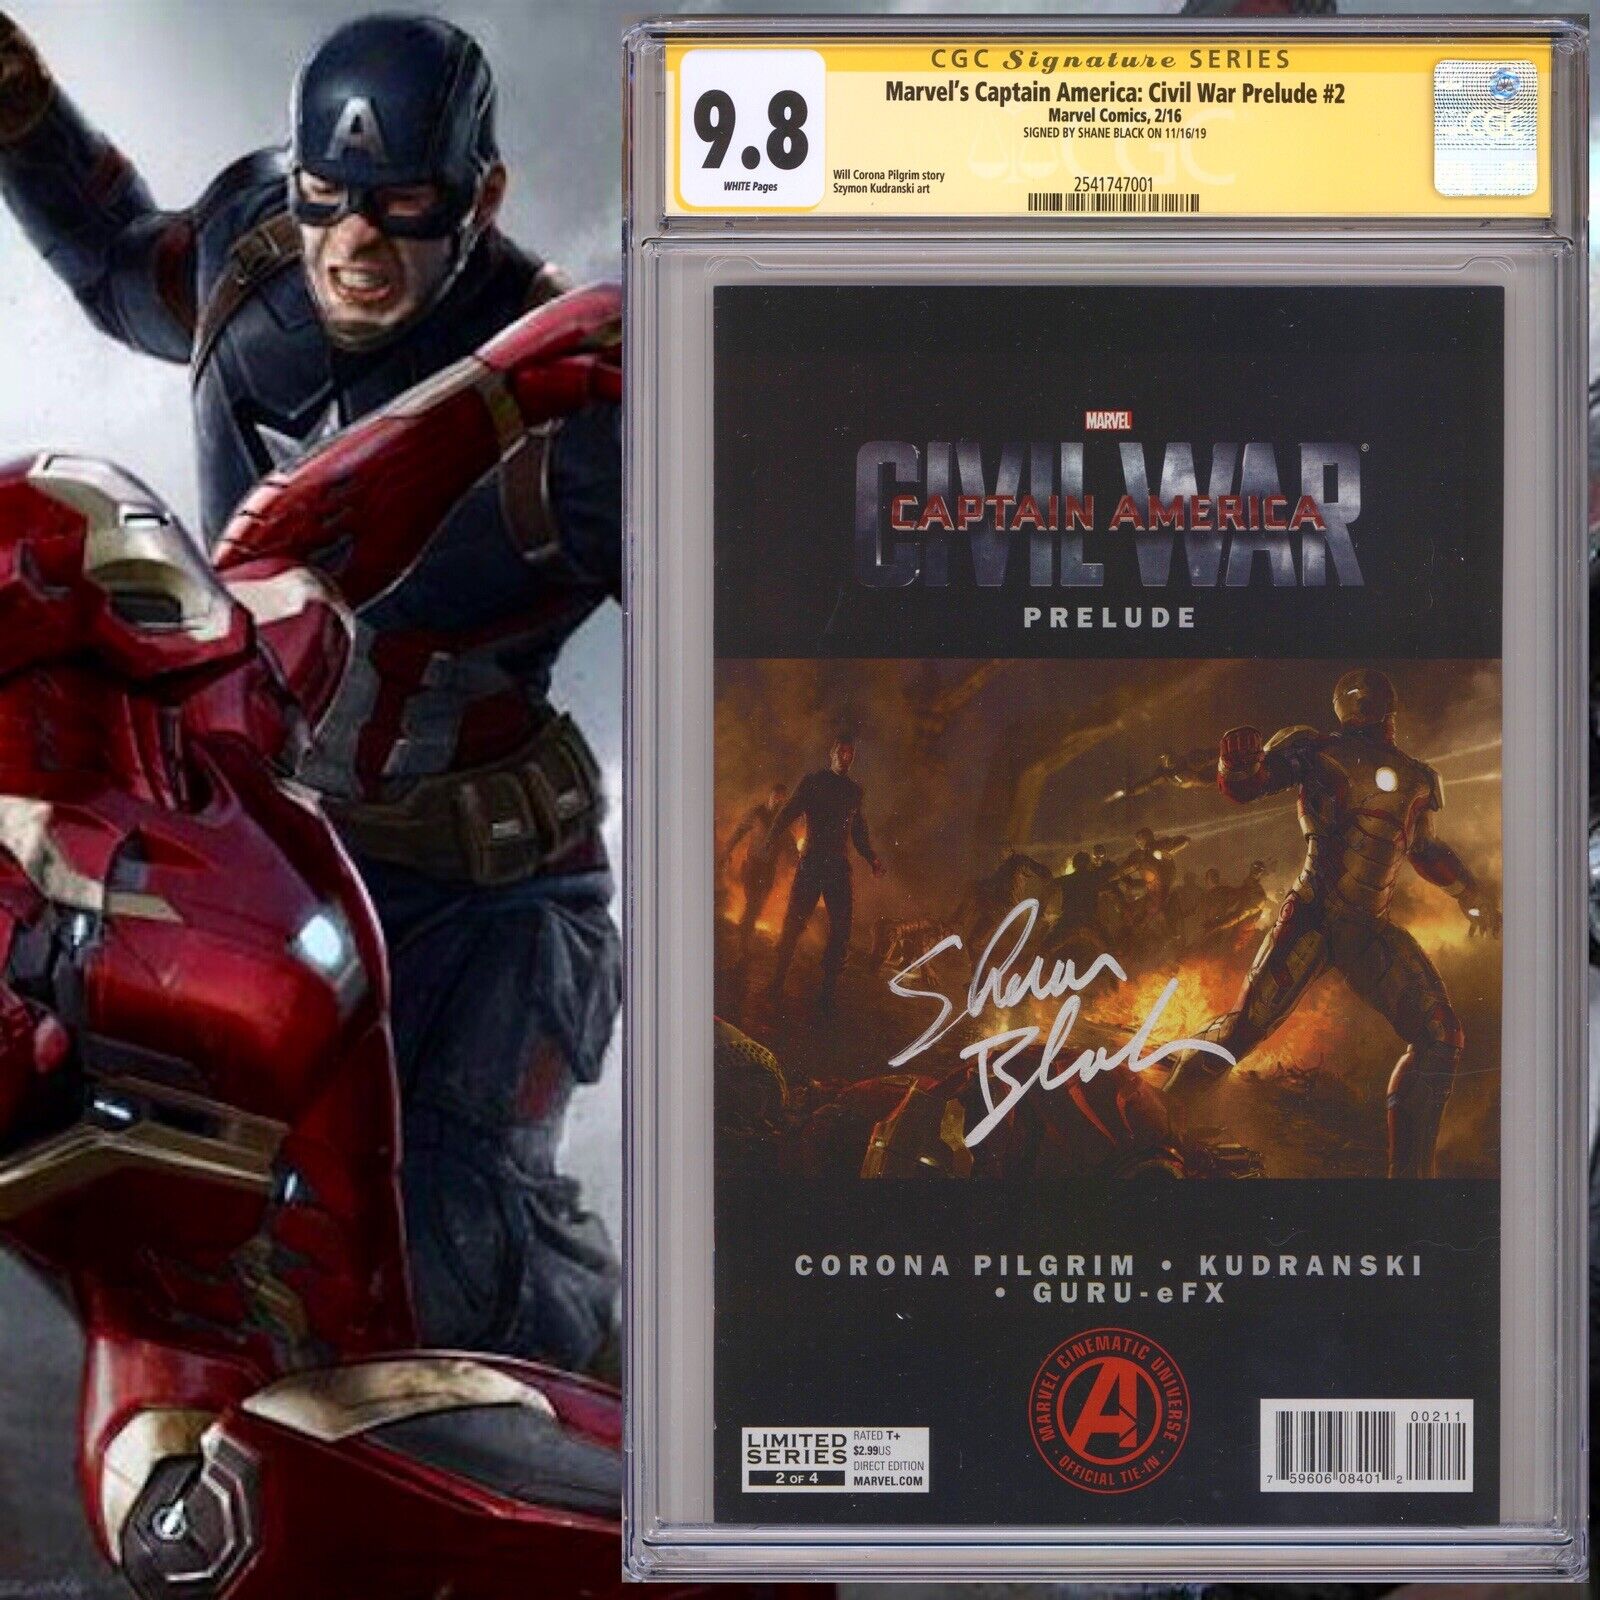 CGC SS 9.8 Captain America Civil War Prelude #2 signed by Shane Black Iron Man 3